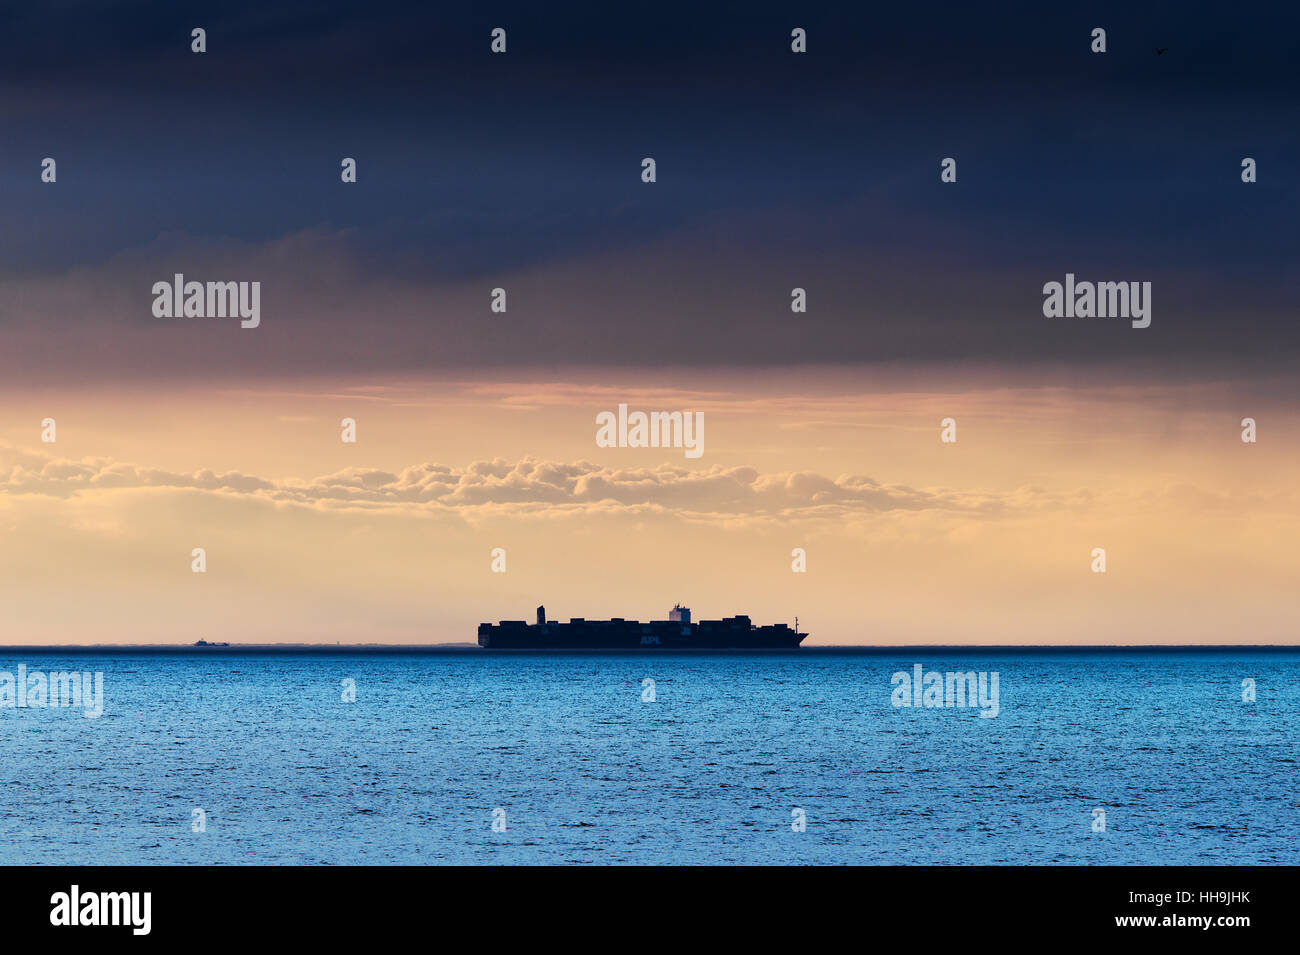 Silhouette of APL American President Lines container ship crossing Baltic sea under dramatic dark cloud formation. Poland. Stock Photo